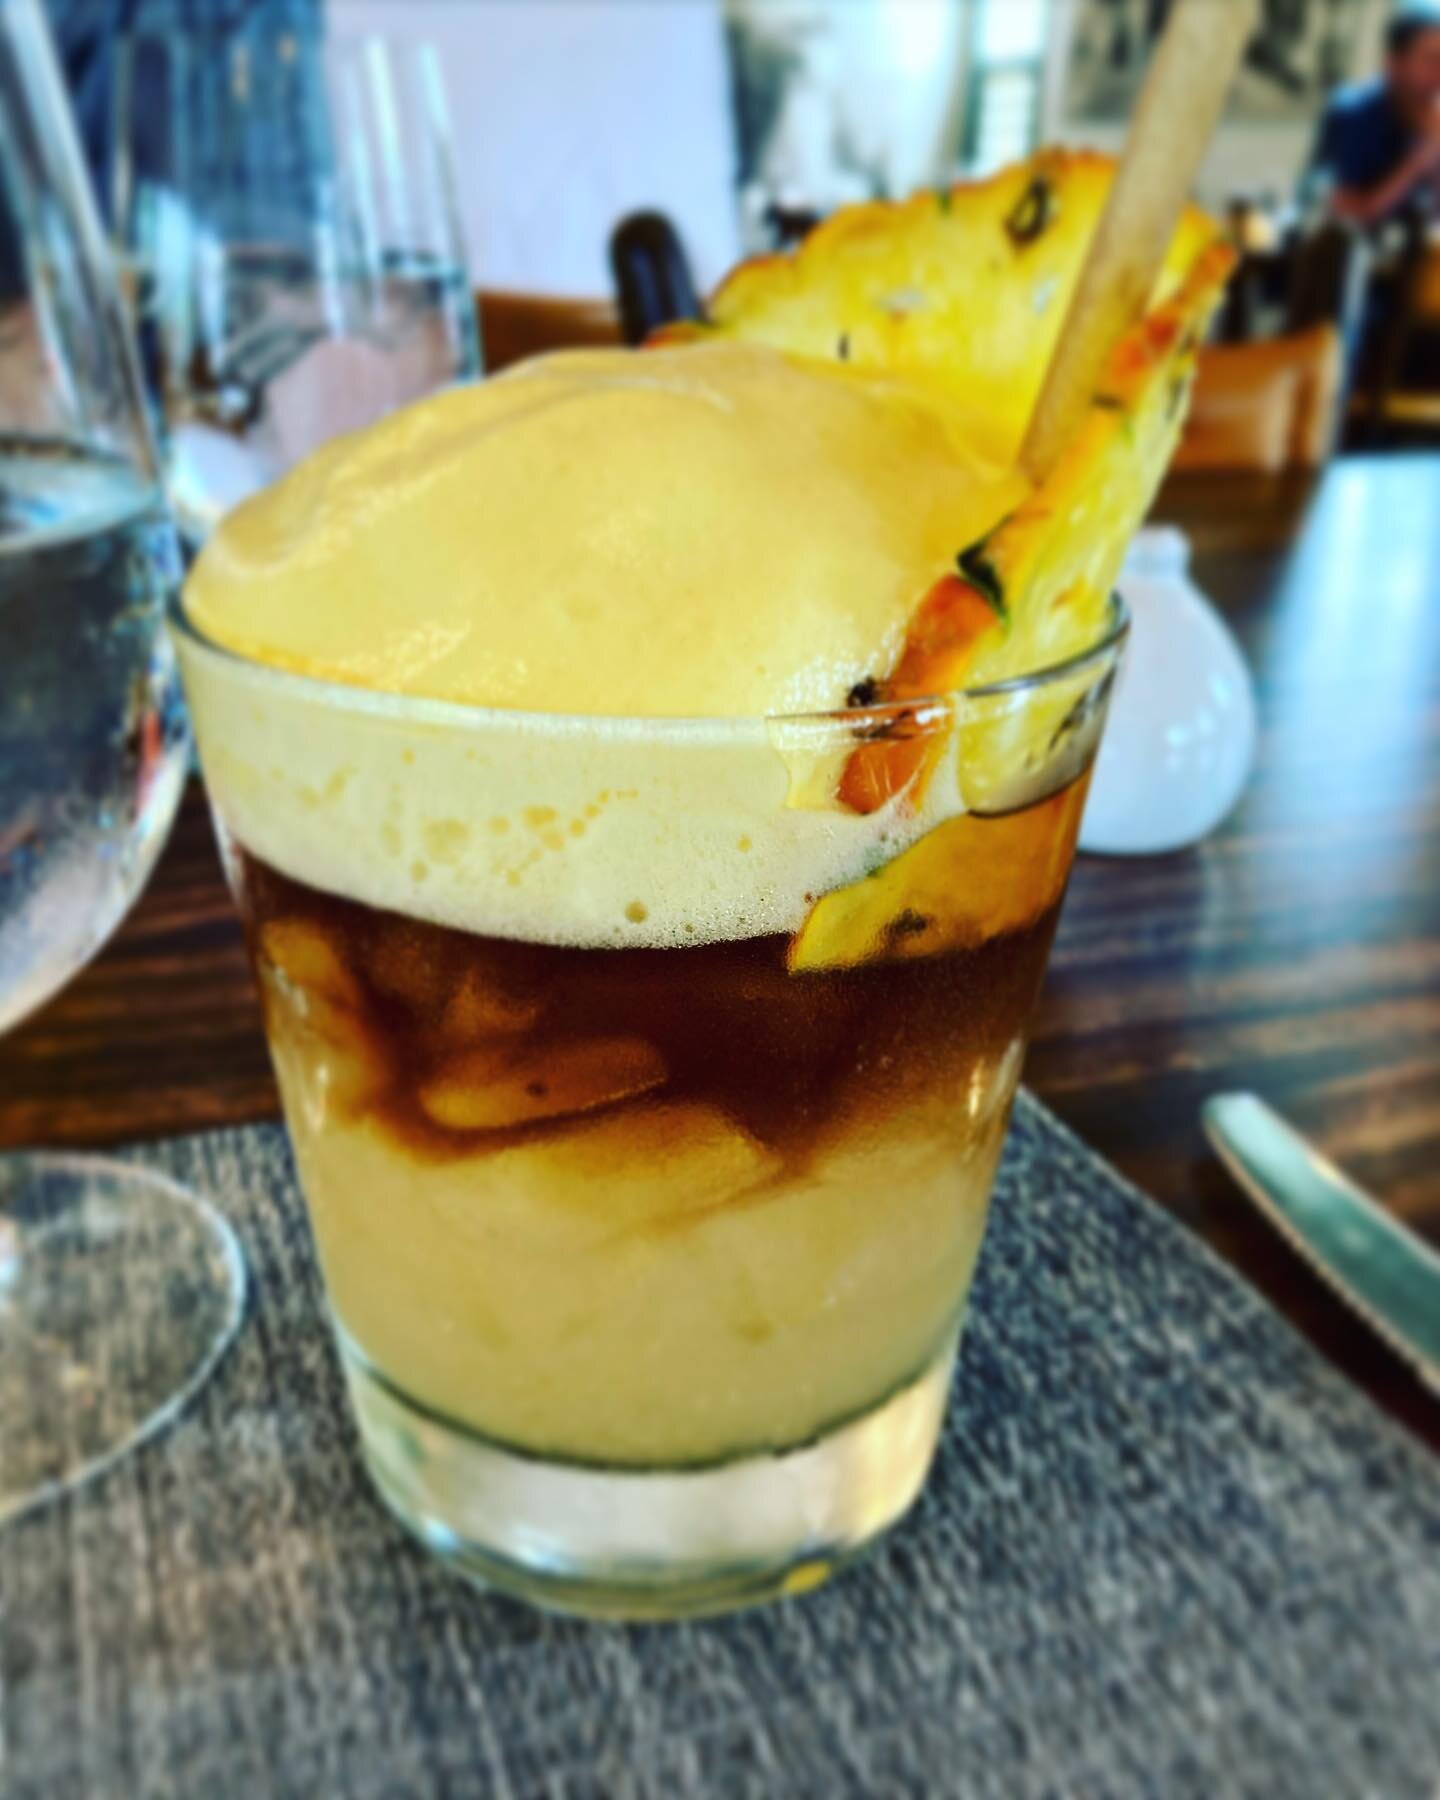 This is officially now a &ldquo;Mai Tai&rsquo;s of the Big Island&rdquo; feed until further notice. This one from @merrimanswaimea is a tough one to beat. 🍍🌺#hawaii #maitai #alltherum